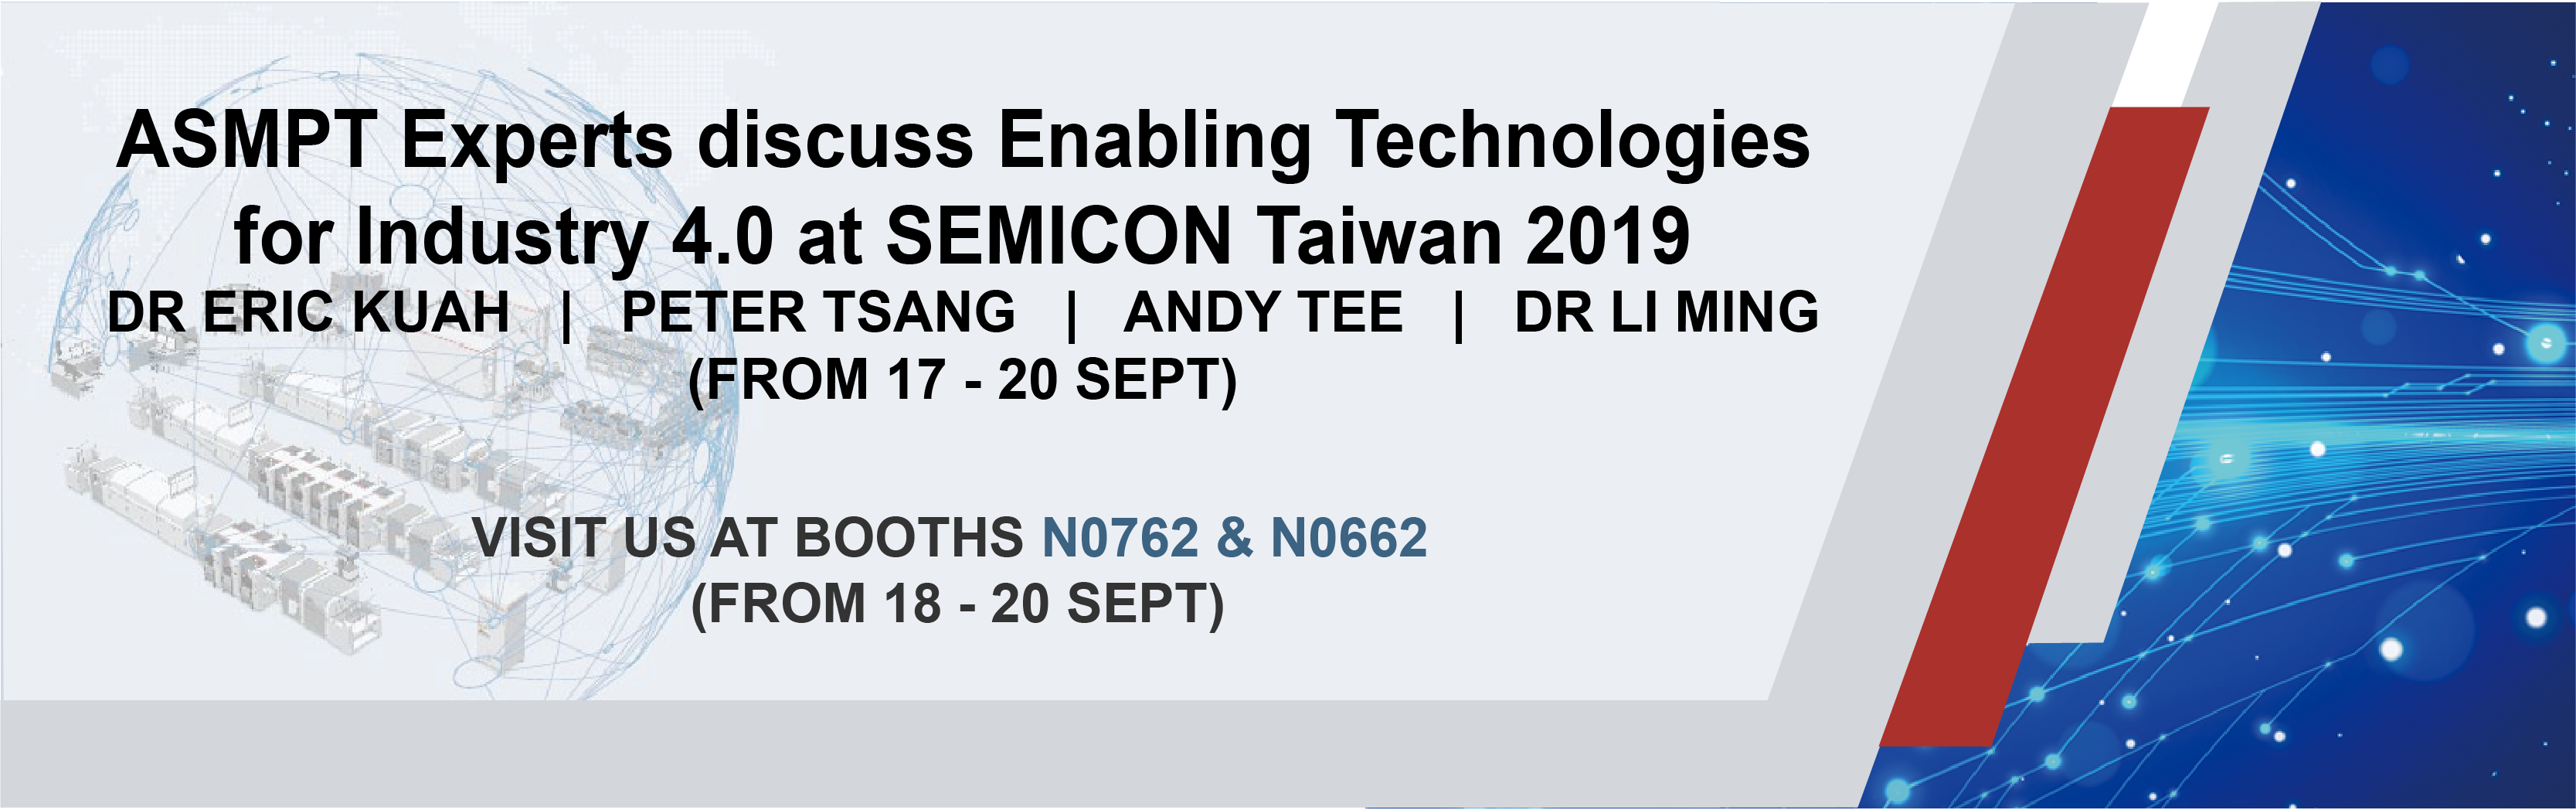 ASM Pacific Technology Experts Discuss Enabling Technologies For Industry 4.0 At SEMICON Taiwan (17 – 20 September 2019)